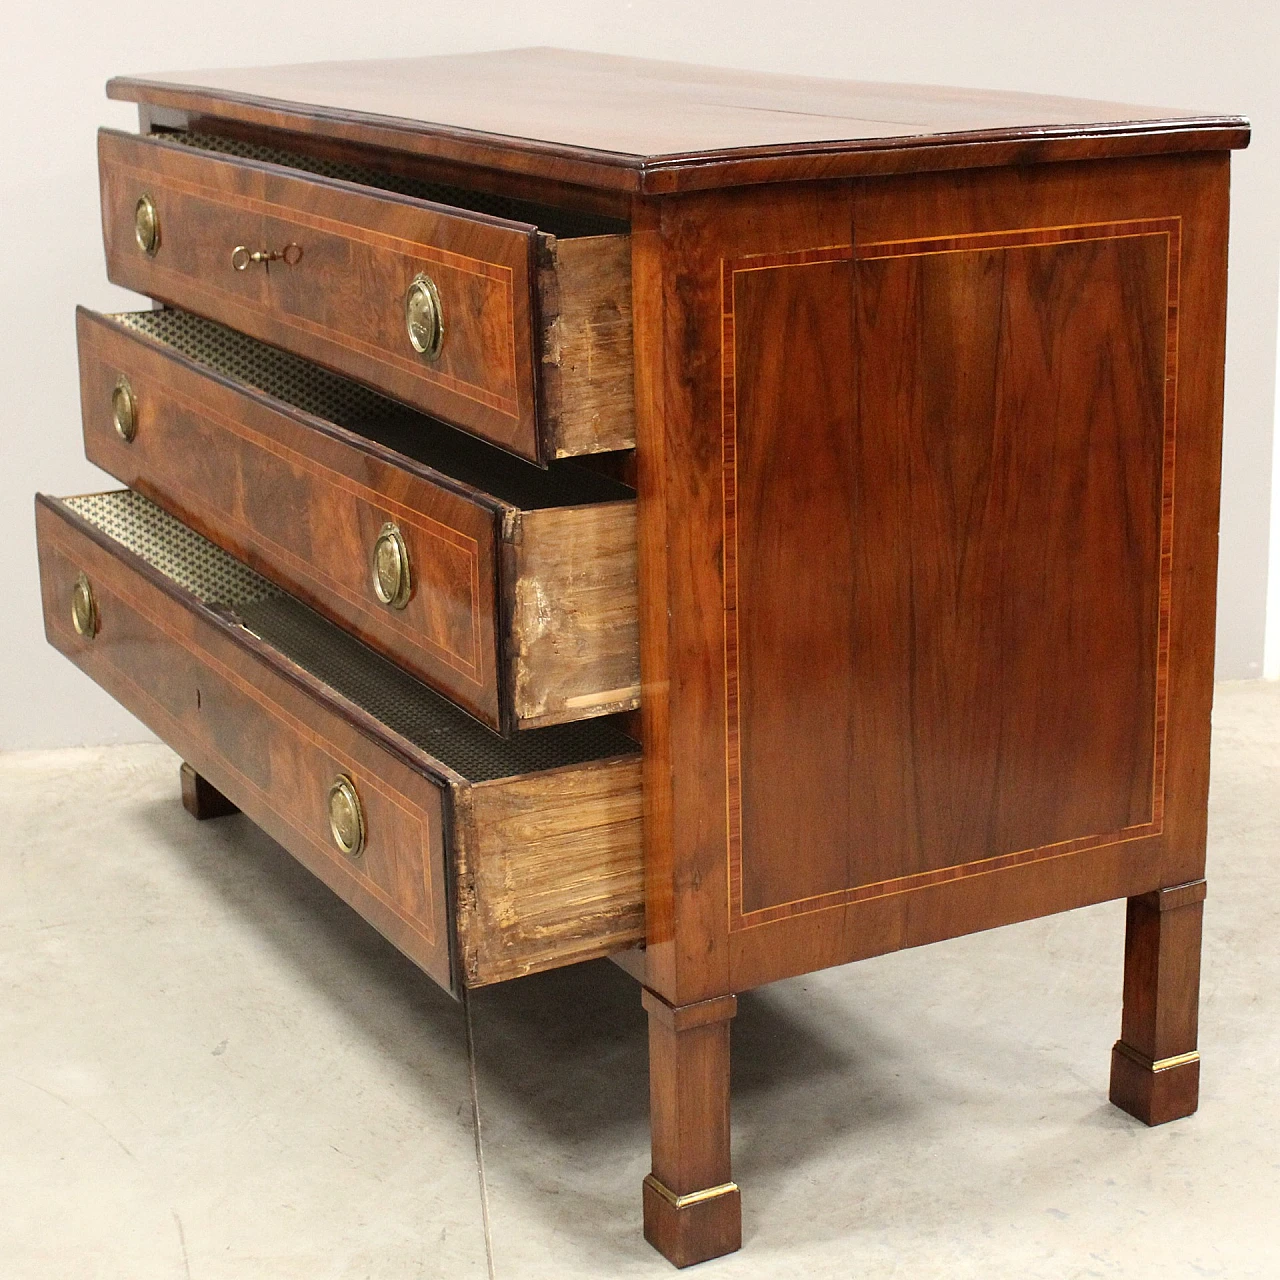 Bolognese Empire solid walnut commode, early 19th century 4